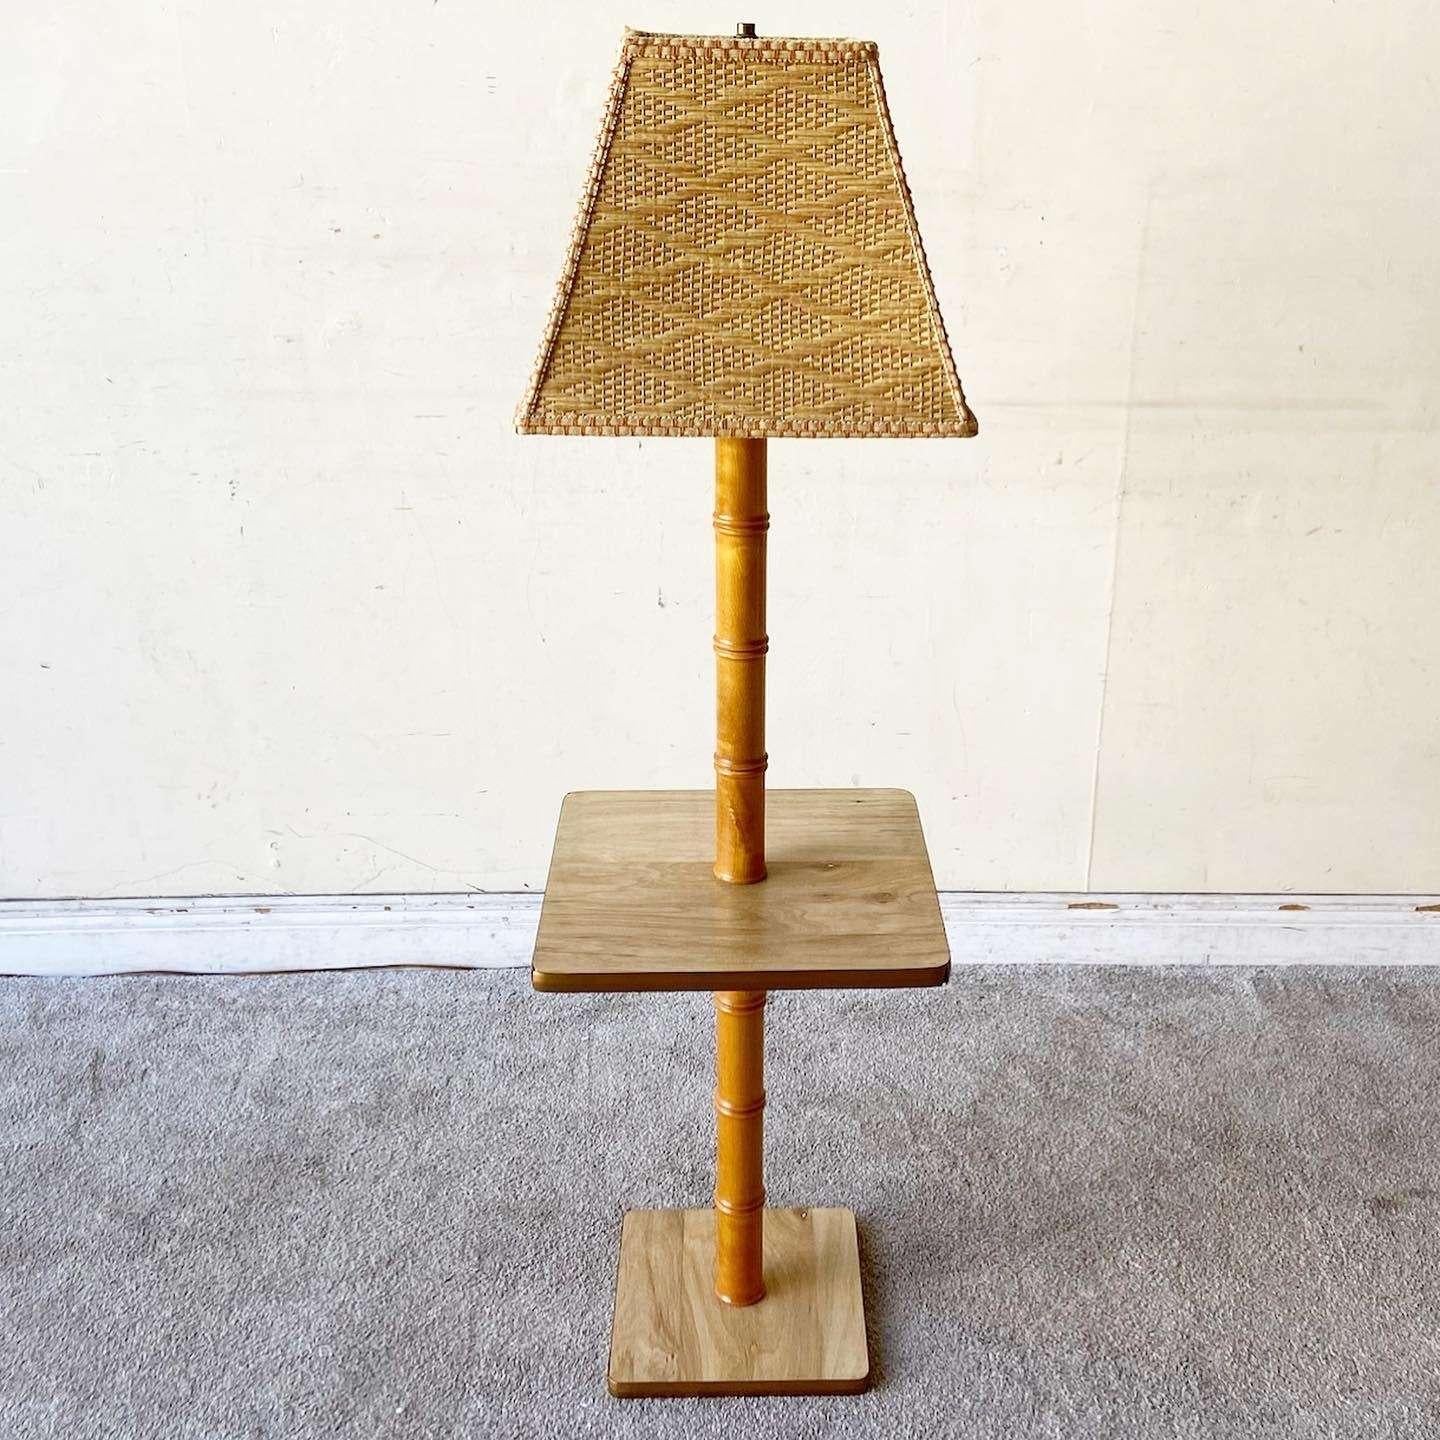 Exceptional vintage bohemian floor lamp/side table. Features a faux bamboo stem with a Woodgrain laminate table and woven lamp shade.
